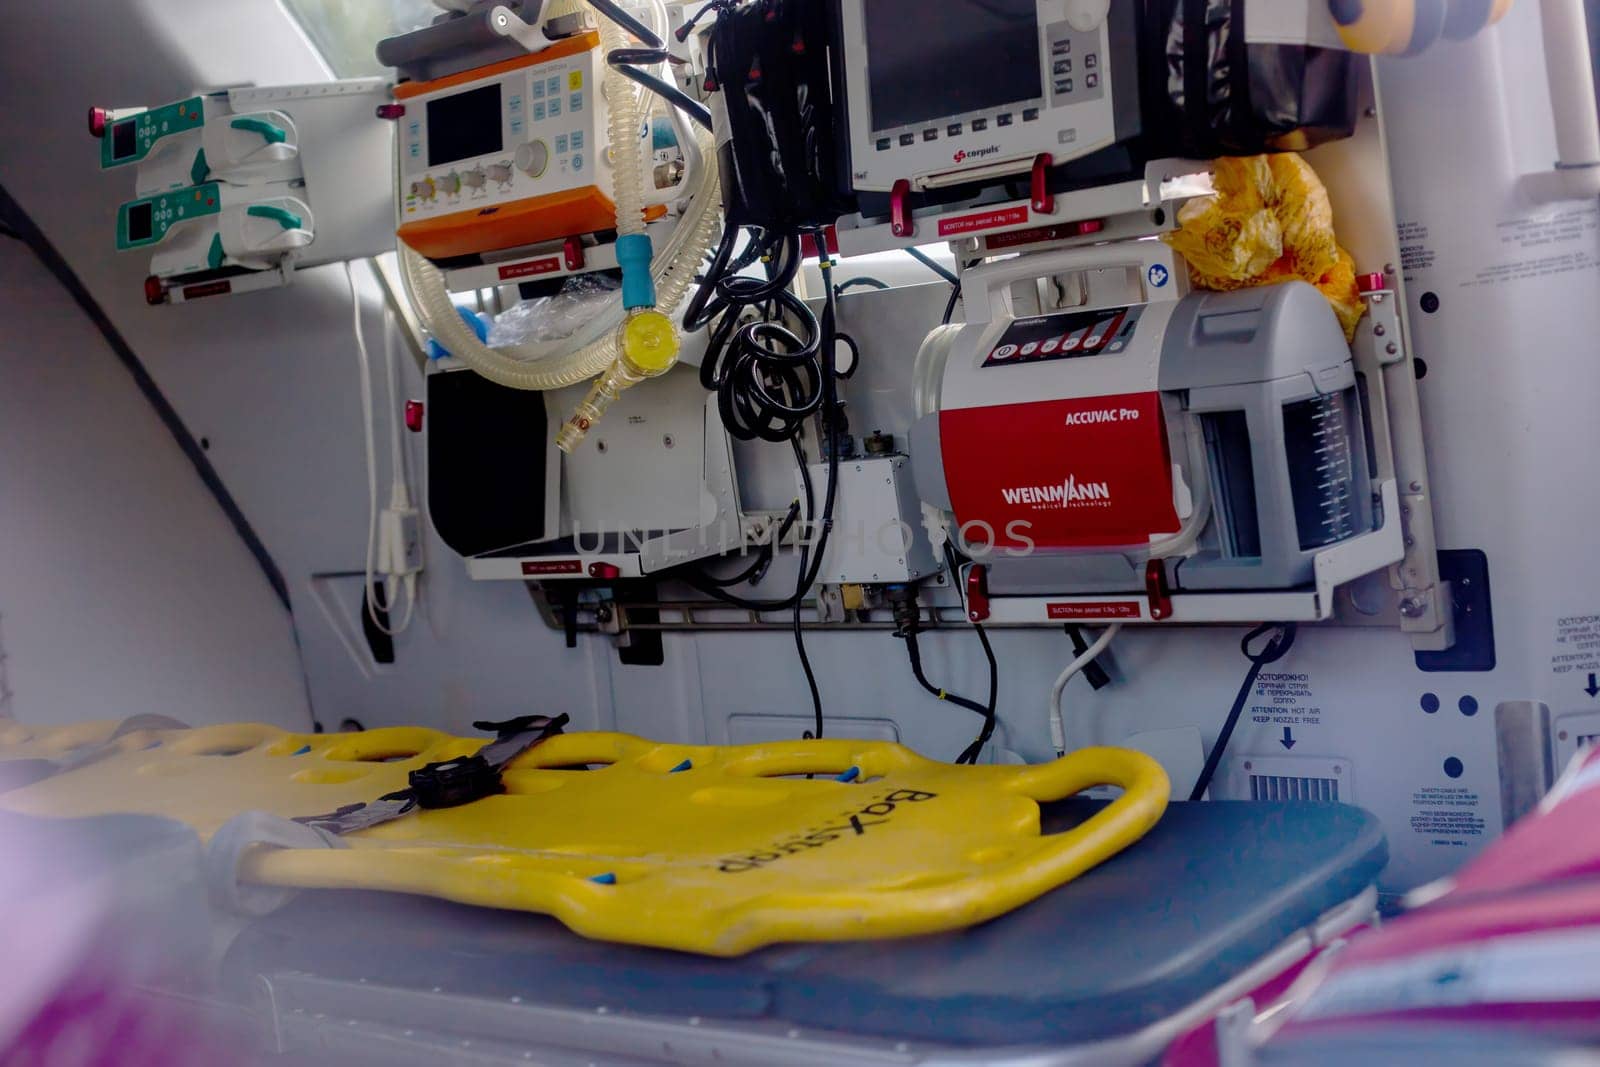 Moscow, Moscow region, Russia - 03.09.2023:An inside view of an ambulance helicopter with modern life support devices and a yellow spinal platform